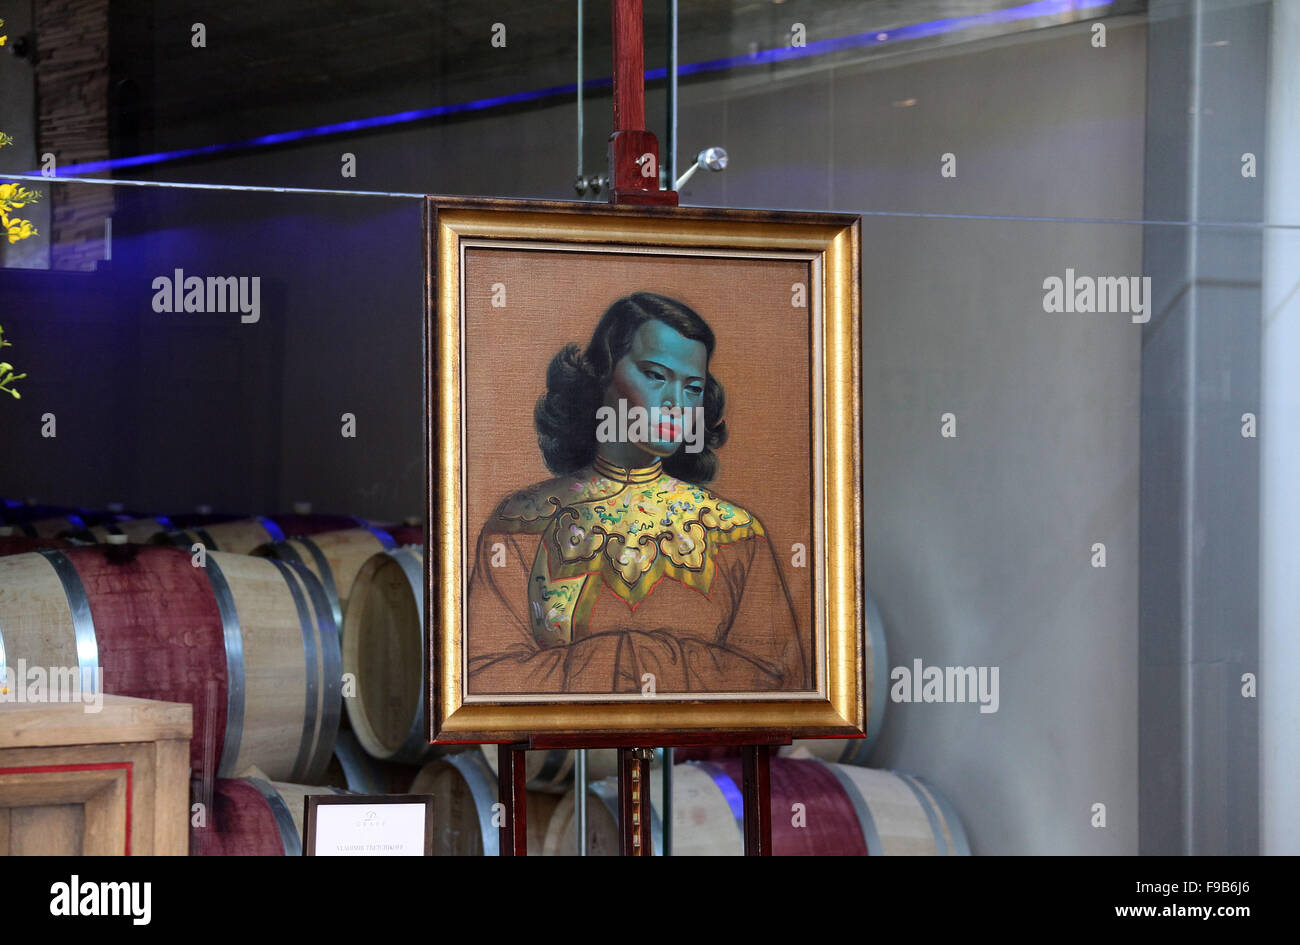 Iconic original painting of the Chinese Girl by Vladimir Tretchikoff on display at Delaire Graff Wine Estate in South Africa Stock Photo